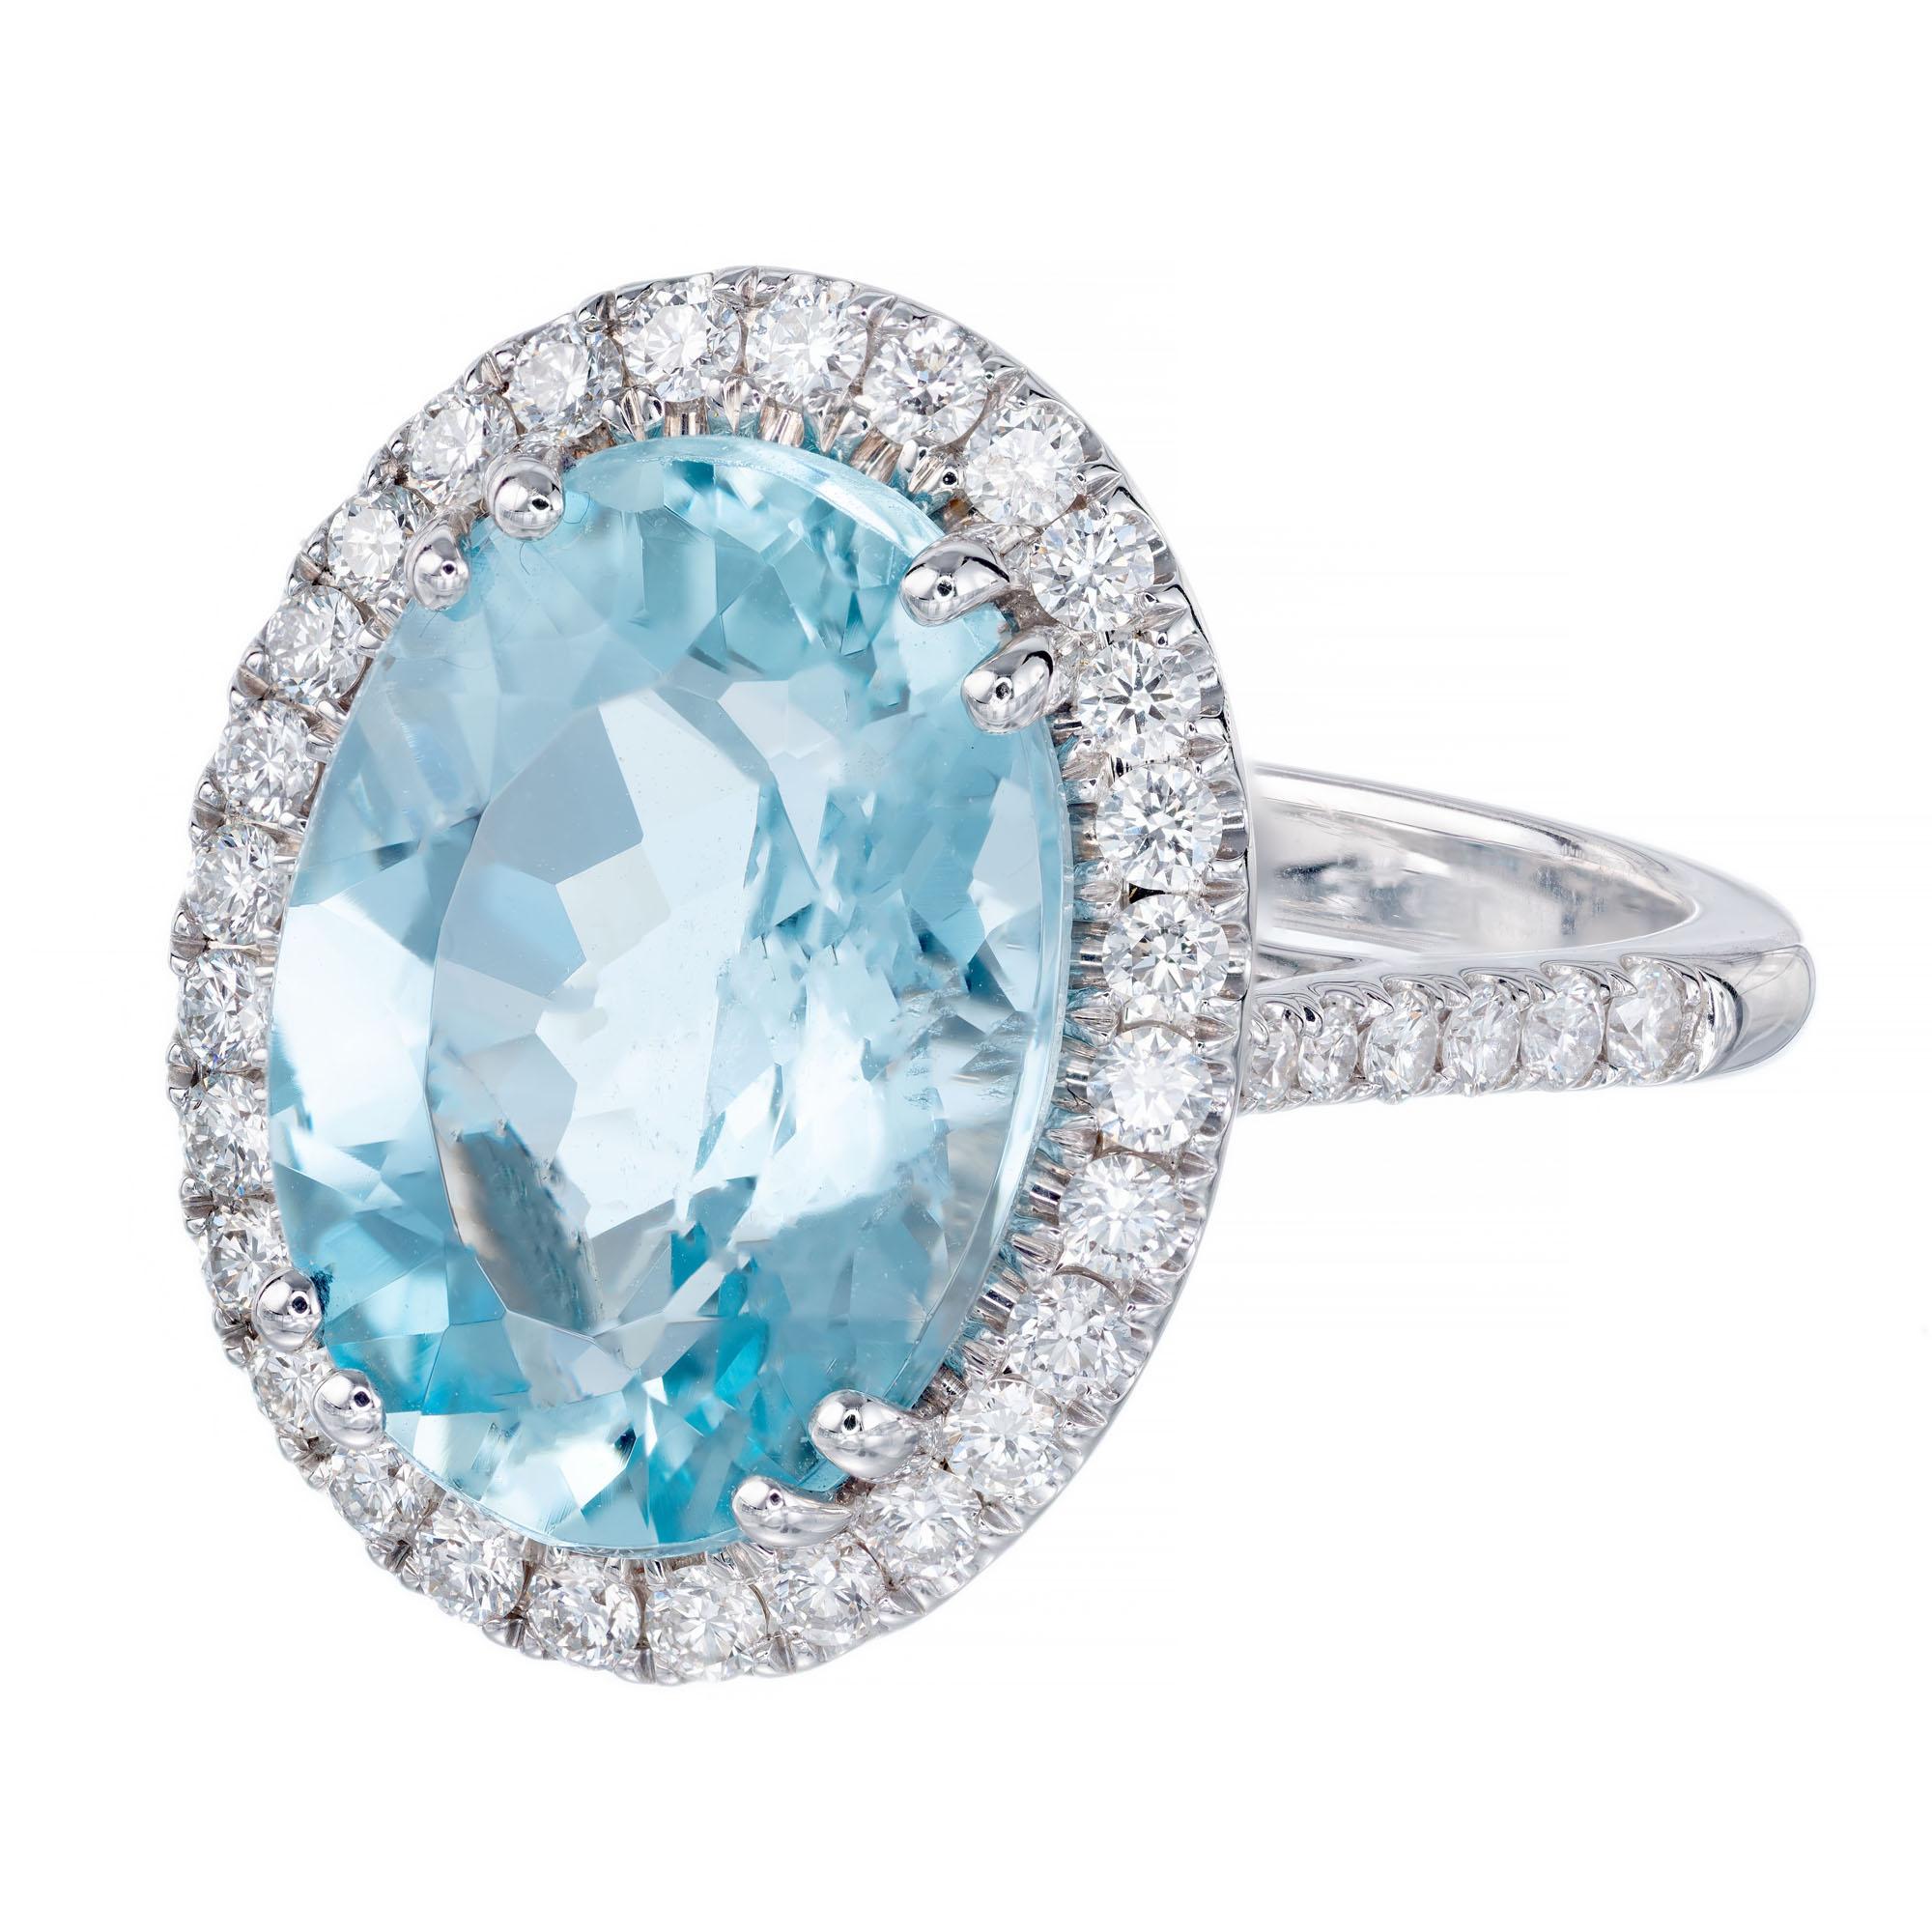 Bright blue natural aqua halo diamond ring from the designer Coast. 3.65ct oval aqua center stone with a halo of round diamonds in a 14k white gold setting with diamonds along the shank. 

1 oval cut aquamarine VS2, approx. 3.65cts
42 round